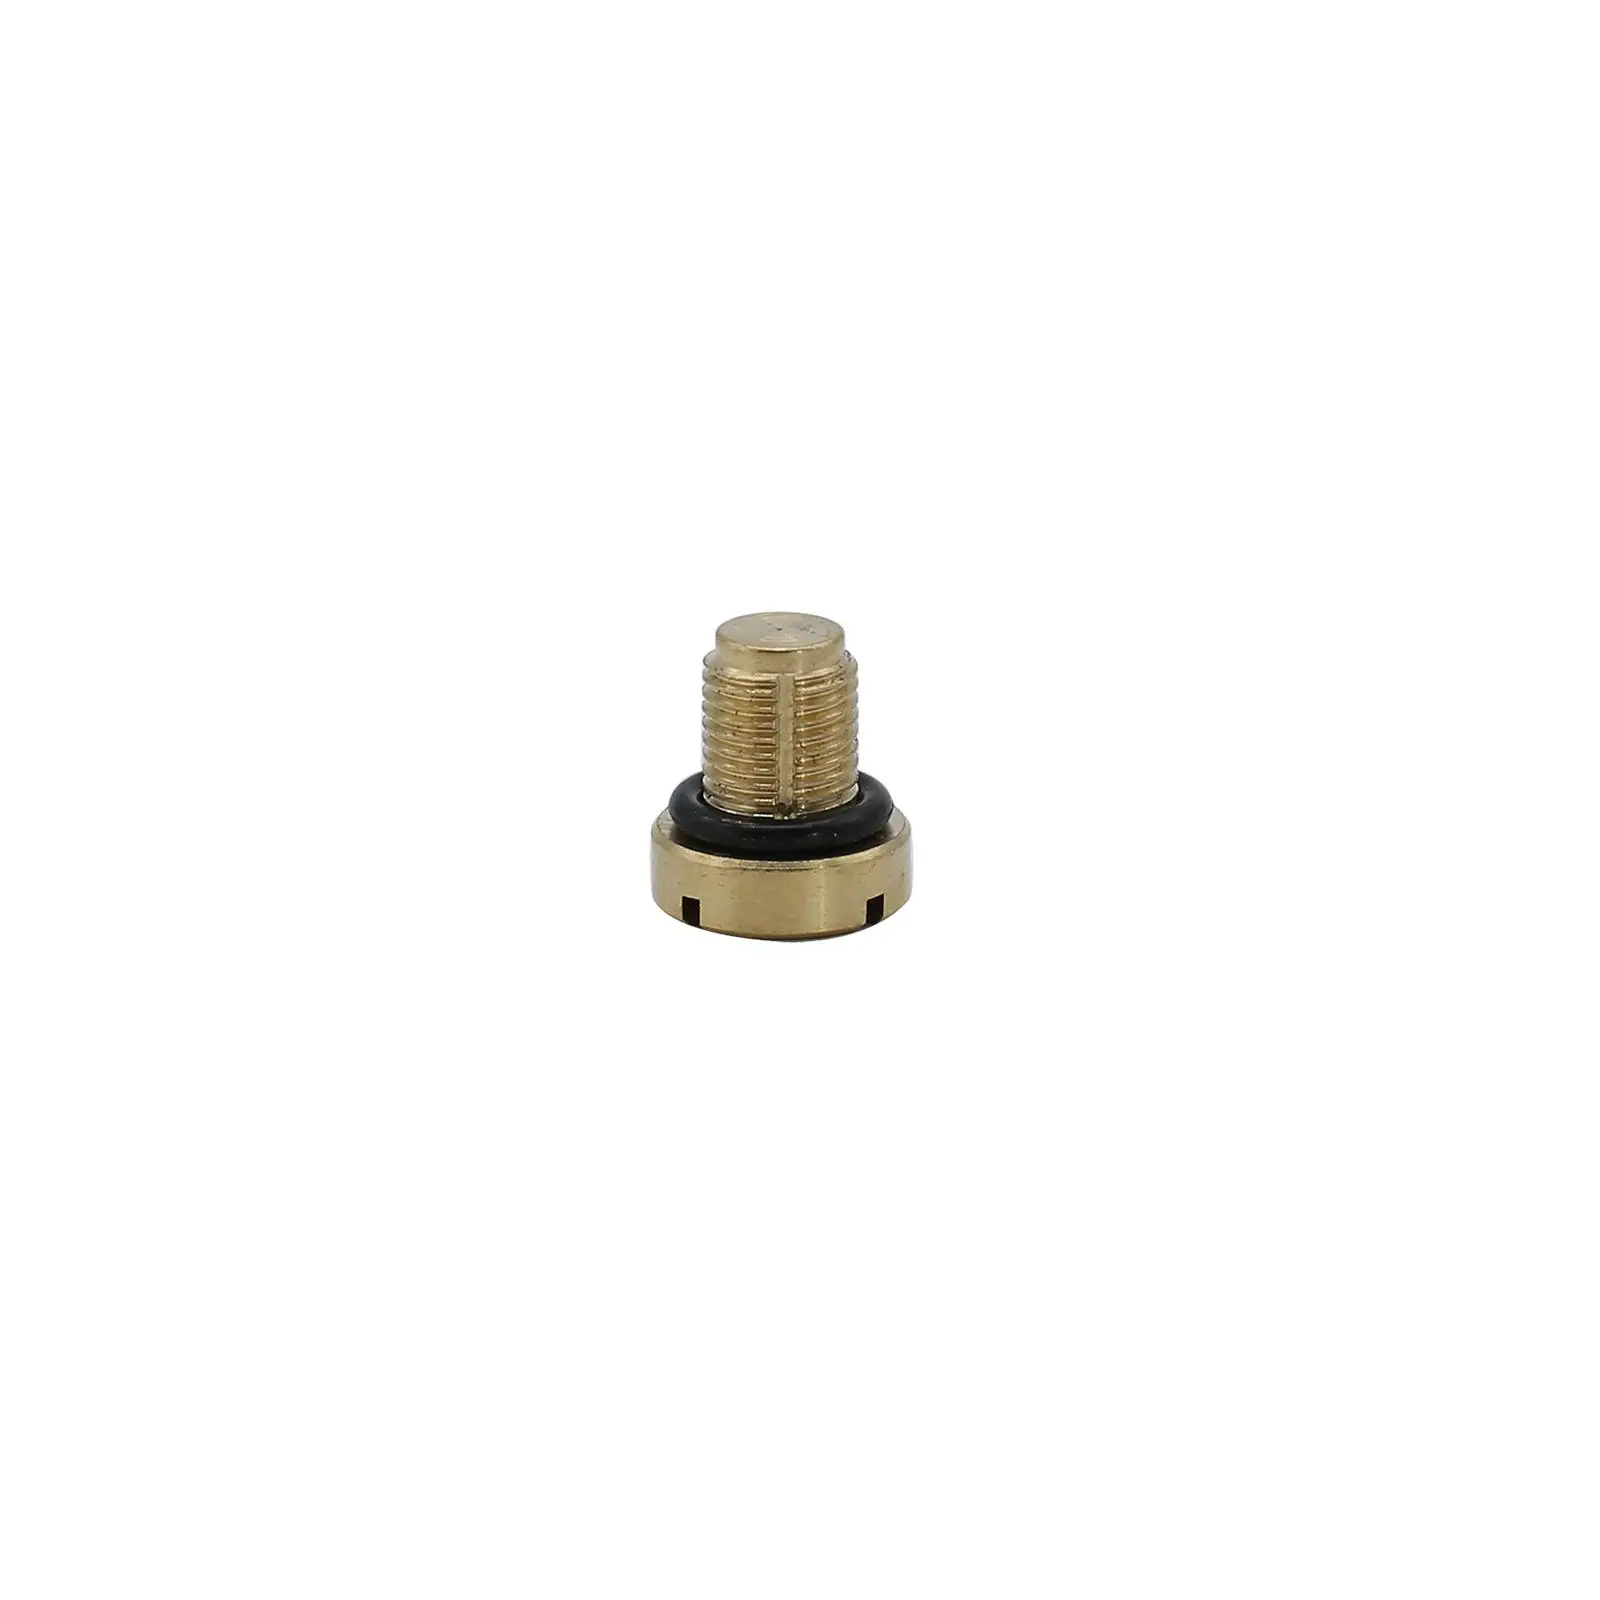 Expansion Tank Bleeder Screw with Rubber O Rings Wear Resistant Durable Coolant